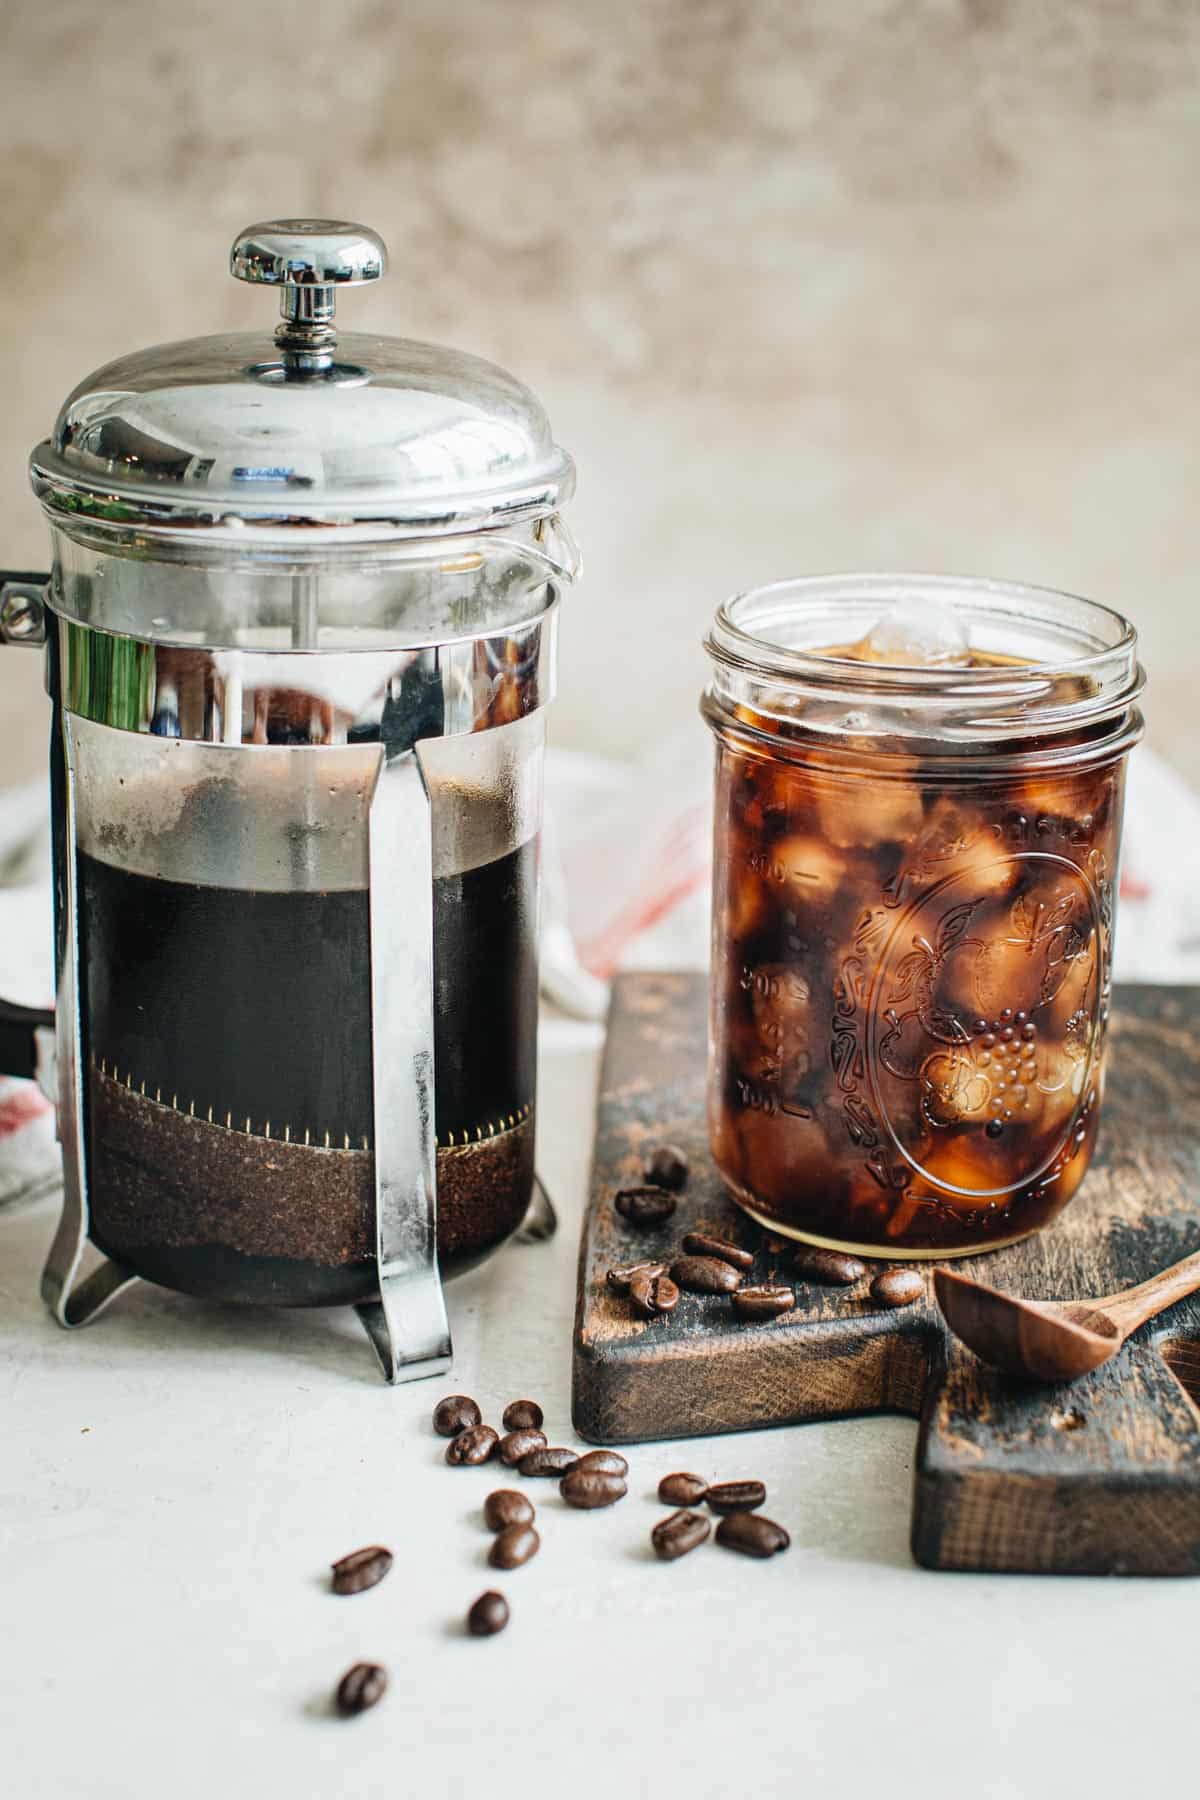 Cold brew coffee in a French press.